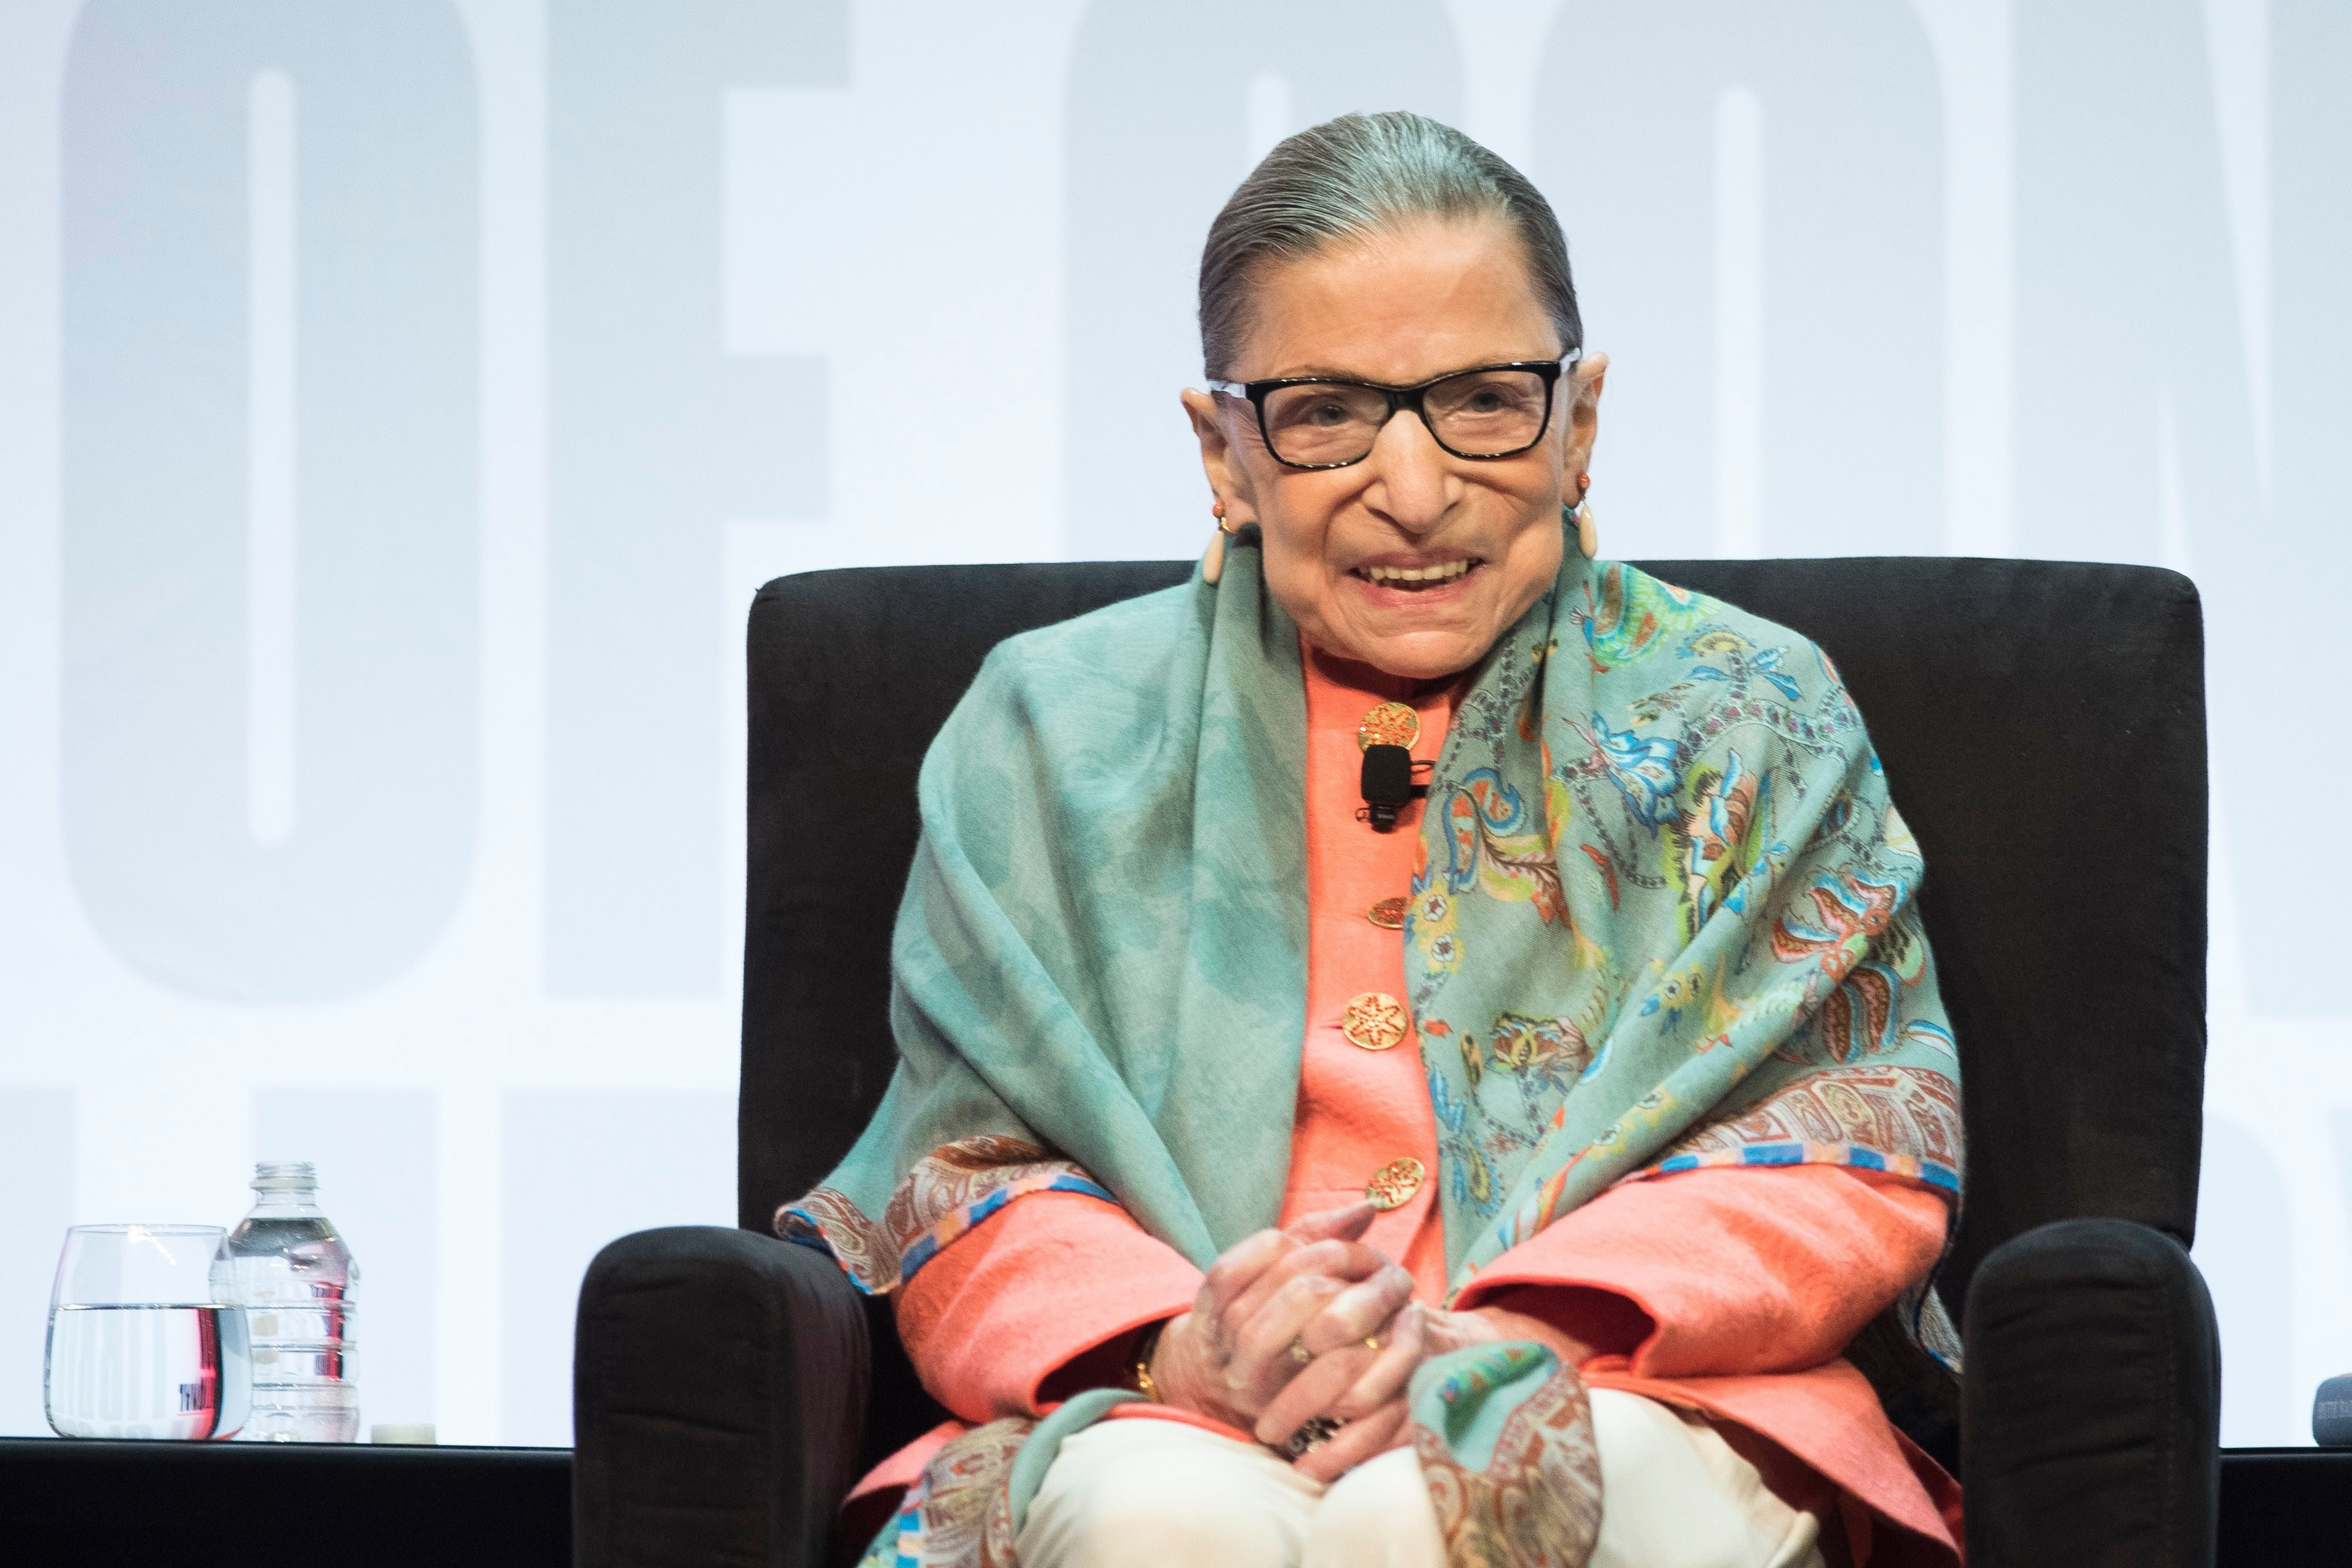 Mandatory Credit: Photo by Cliff Owen/AP/Shutterstock (10376282s) Supreme Court Associate Justice Ruth Bader Ginsburg speaks at the Library of Congress National Book Festival in Washington SCOTUS Ginsberg Book Festival, Washington, USA - 31 Aug 2019